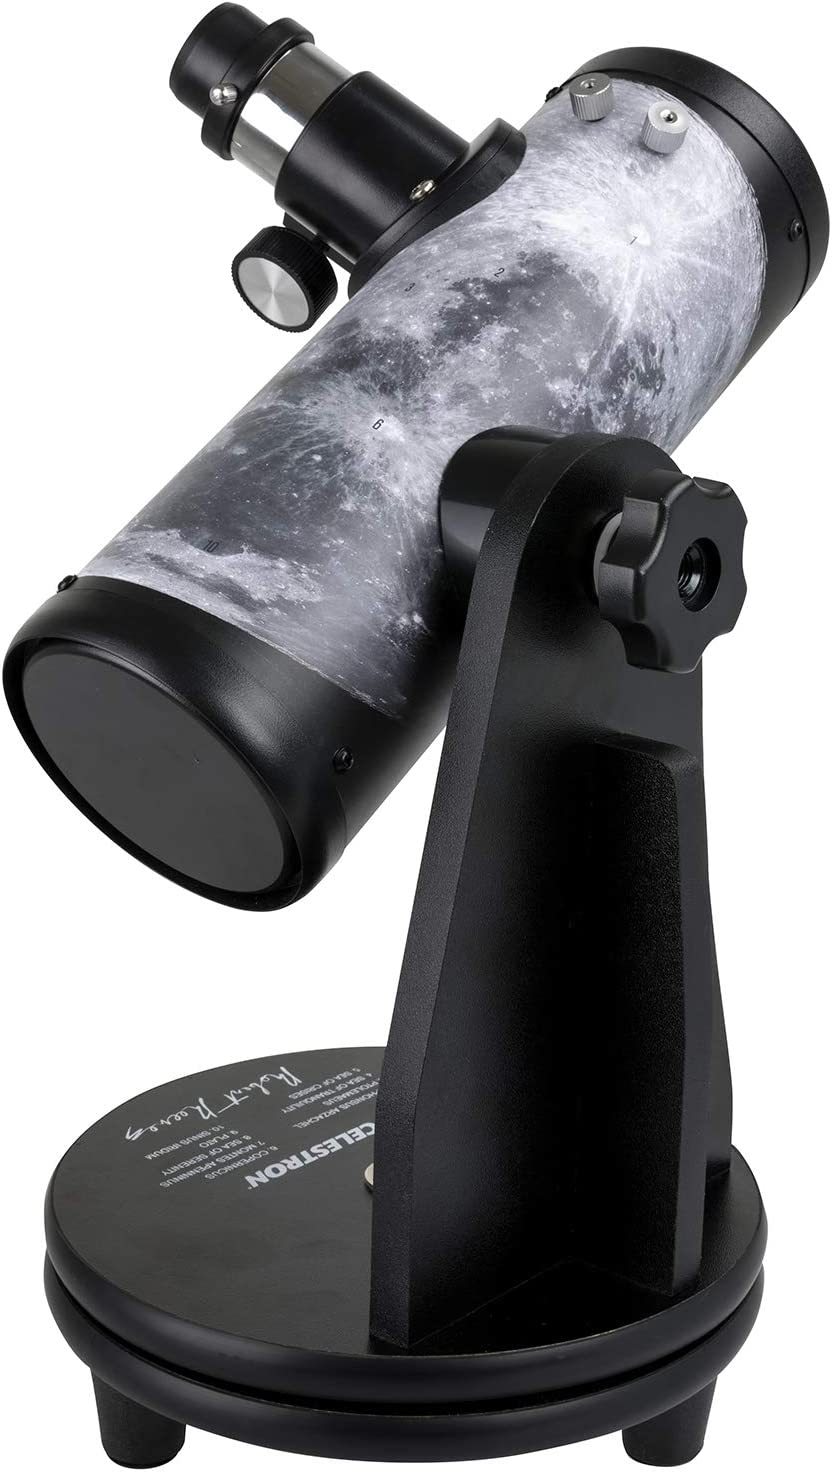 Celestron Signature Series Moon By Robert Reeves Moon Astronomical Telescope, Black (22016)